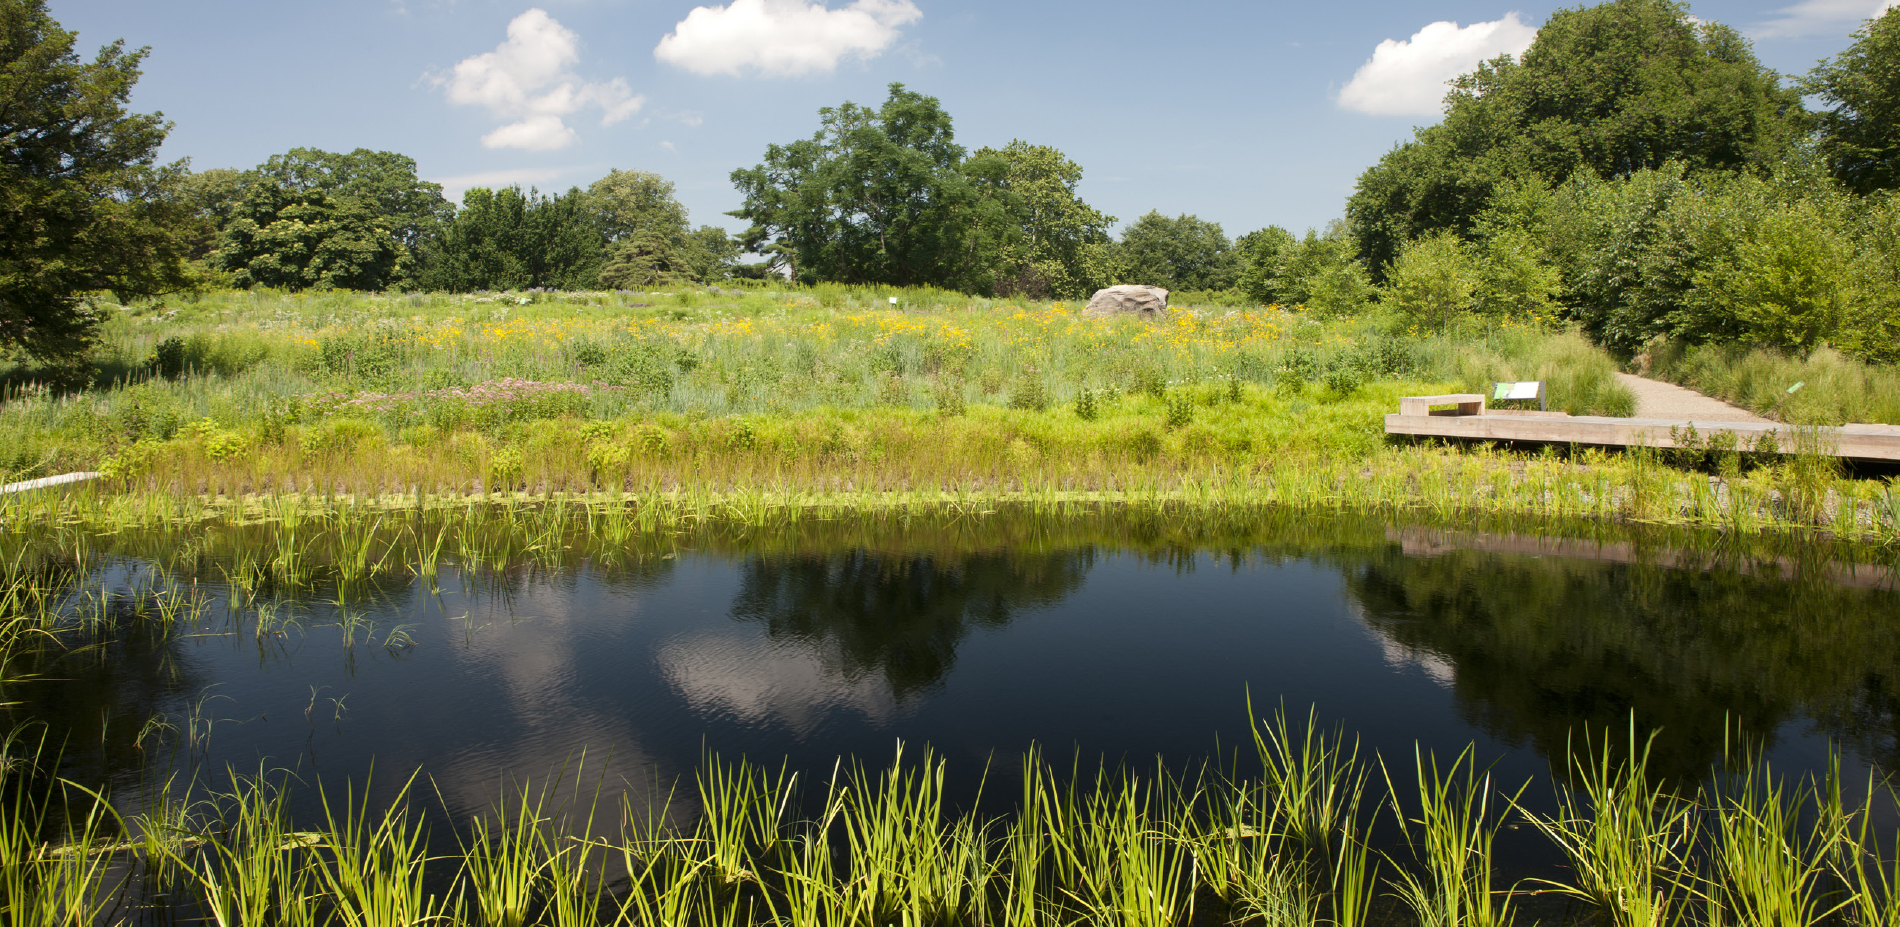 Mid-Summer in the Wetland and Meadow